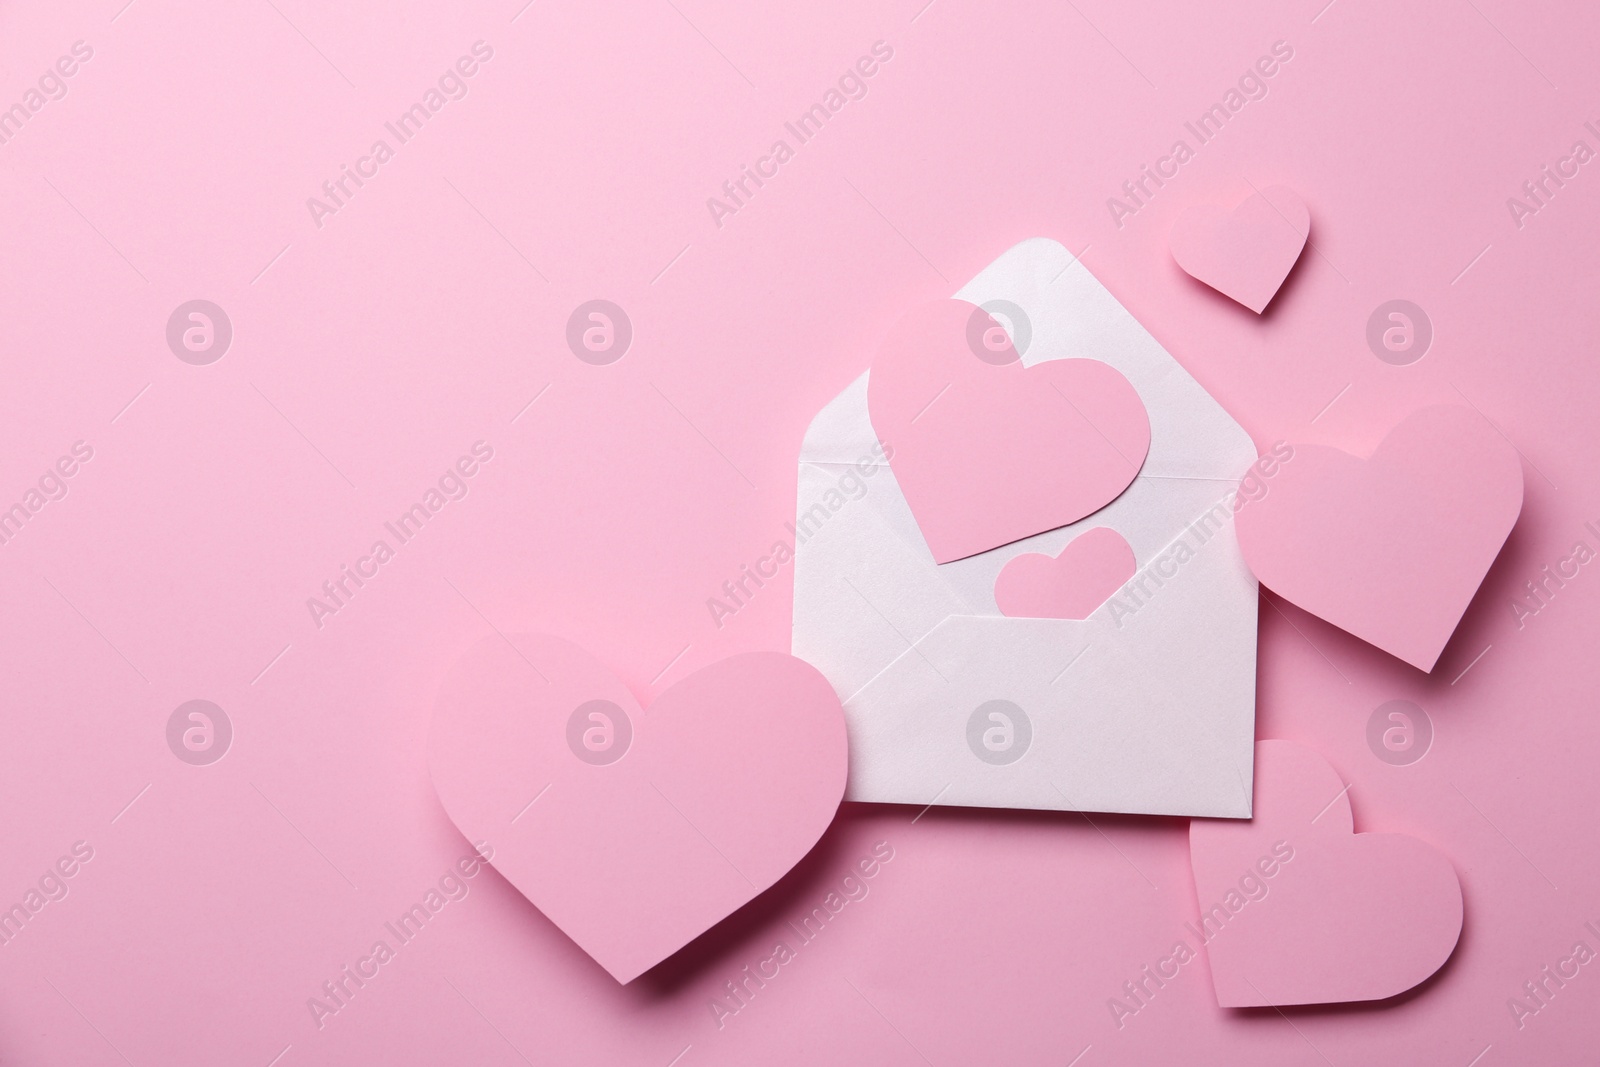 Photo of Paper hearts and envelope on pink background, flat lay